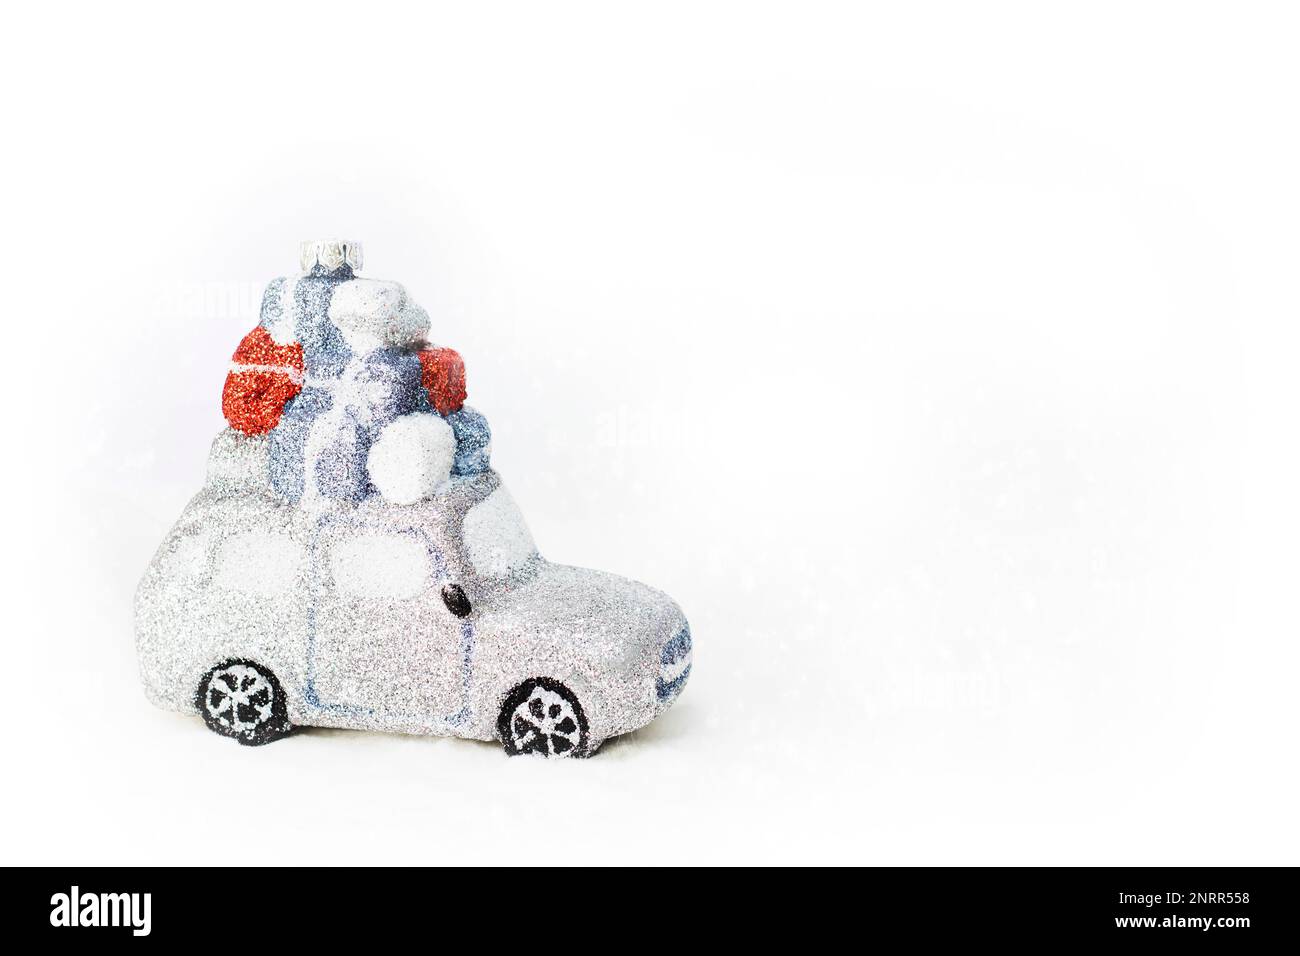 Silver retro toy car delivering Christmas or New Year gifts on white background. Christmas toy. Christmas holiday celebration concept, Merry Christmas Stock Photo